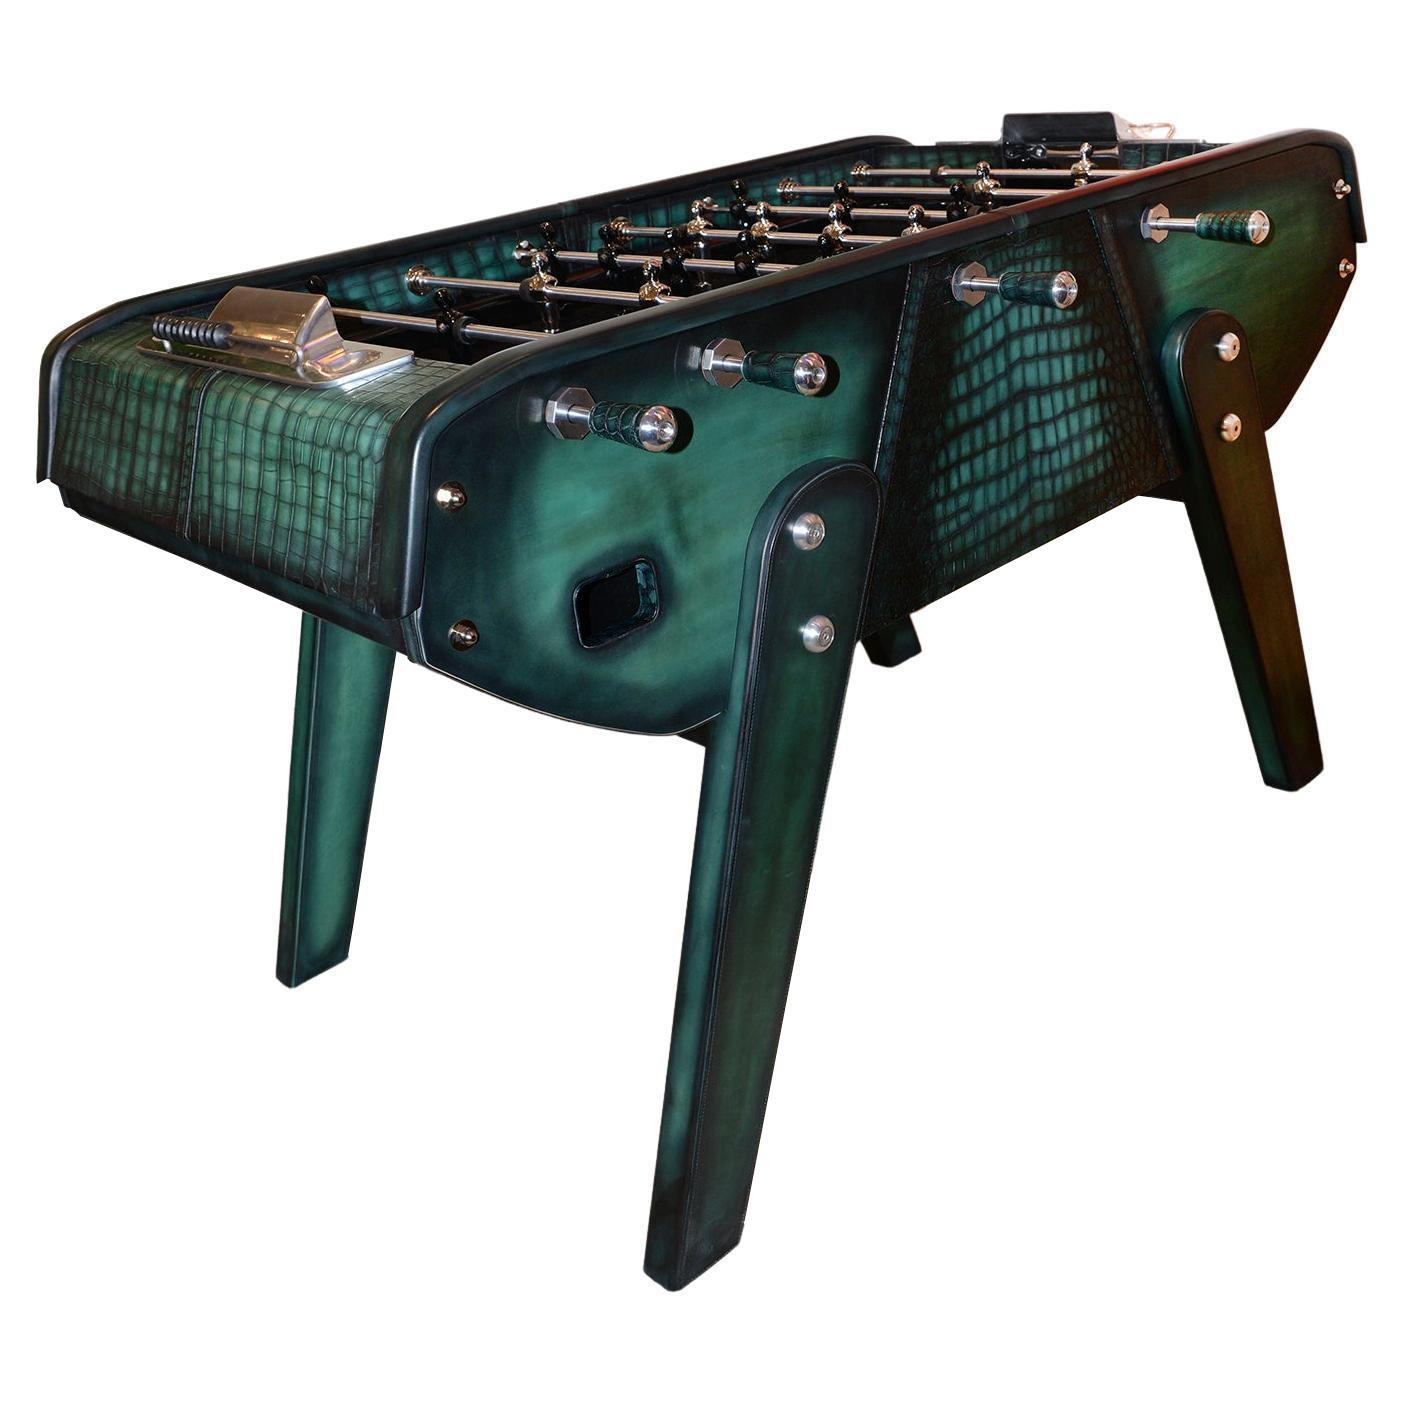 Table Football Alligator with all structure in first choice solid beech 
wood and some parts in beech plywood, upholstered and covered with
real alligator skin in dark green color and with high quality genuine dark green 
leather with gradient. The